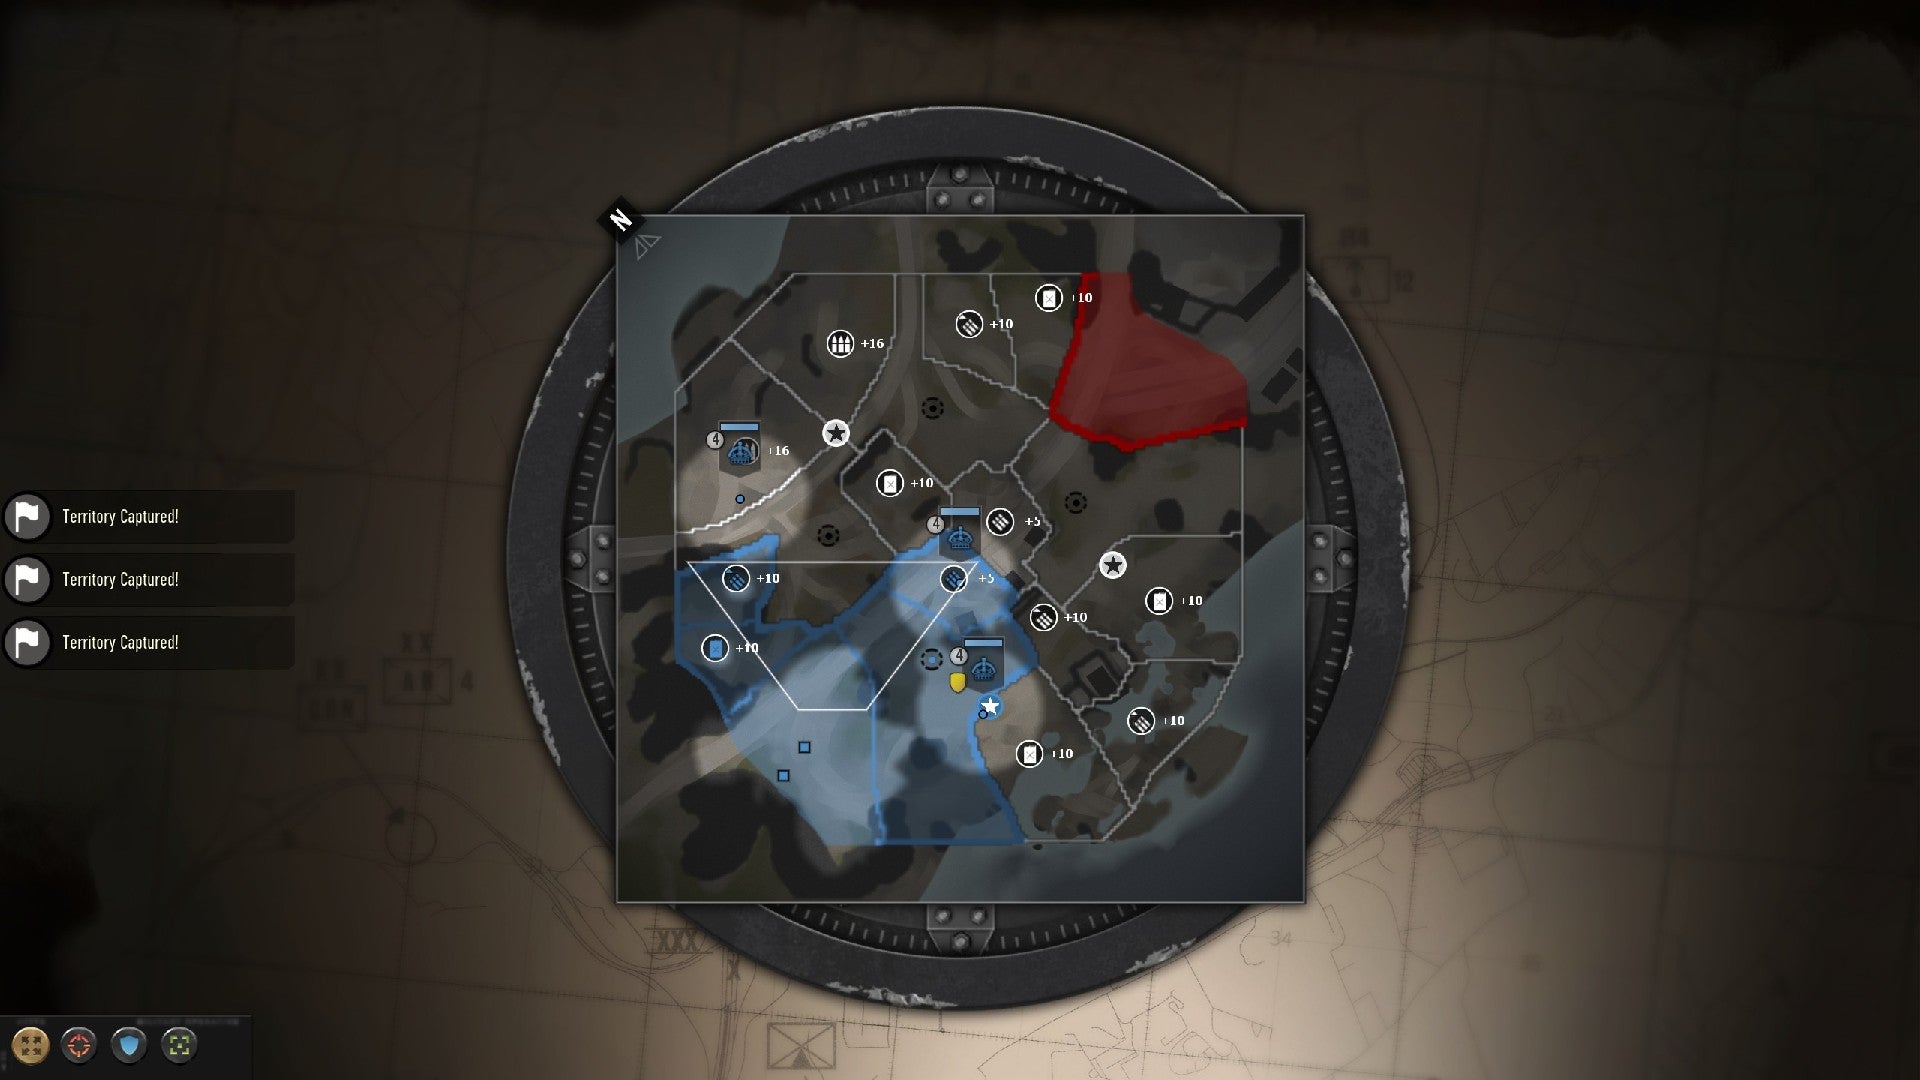 Company of Heroes 3 image showing the map, with blue and red tiles denoting captured positions.